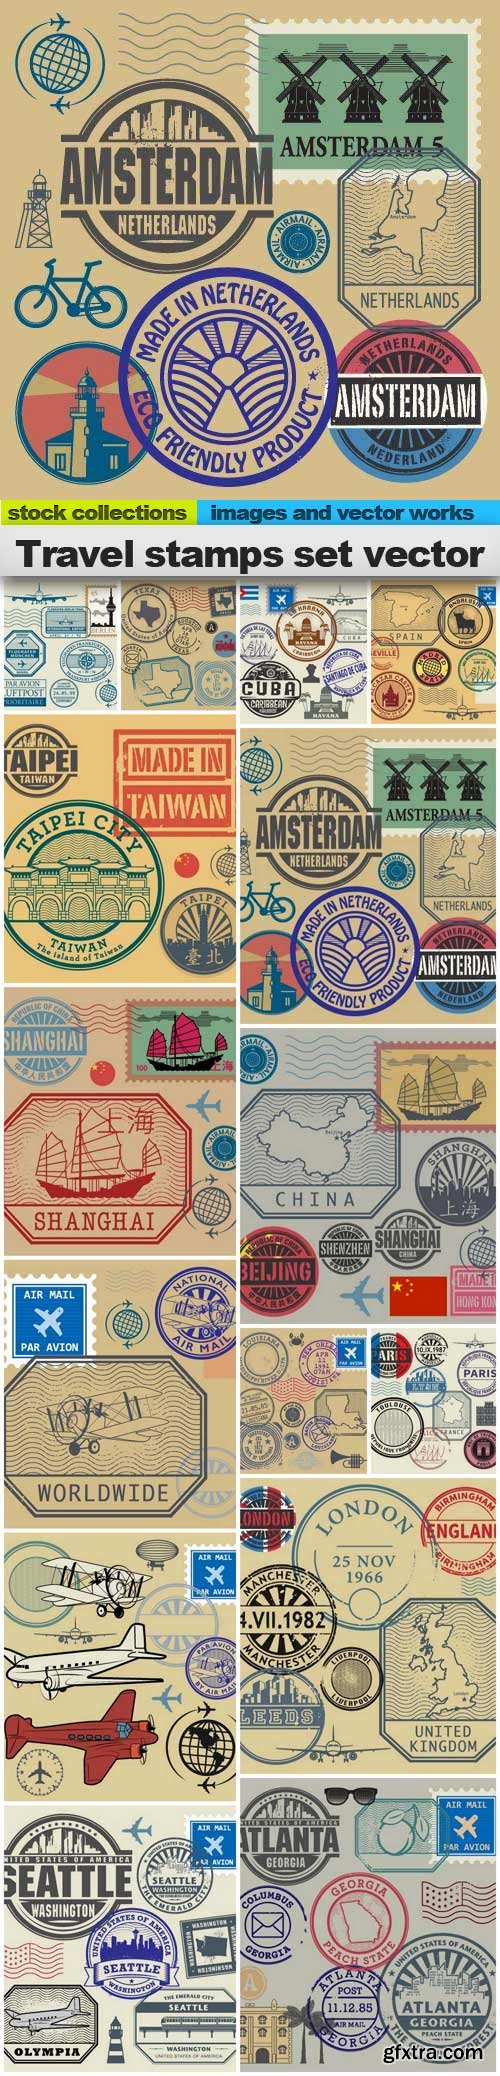 Travel stamps set vector, 15 x EPS